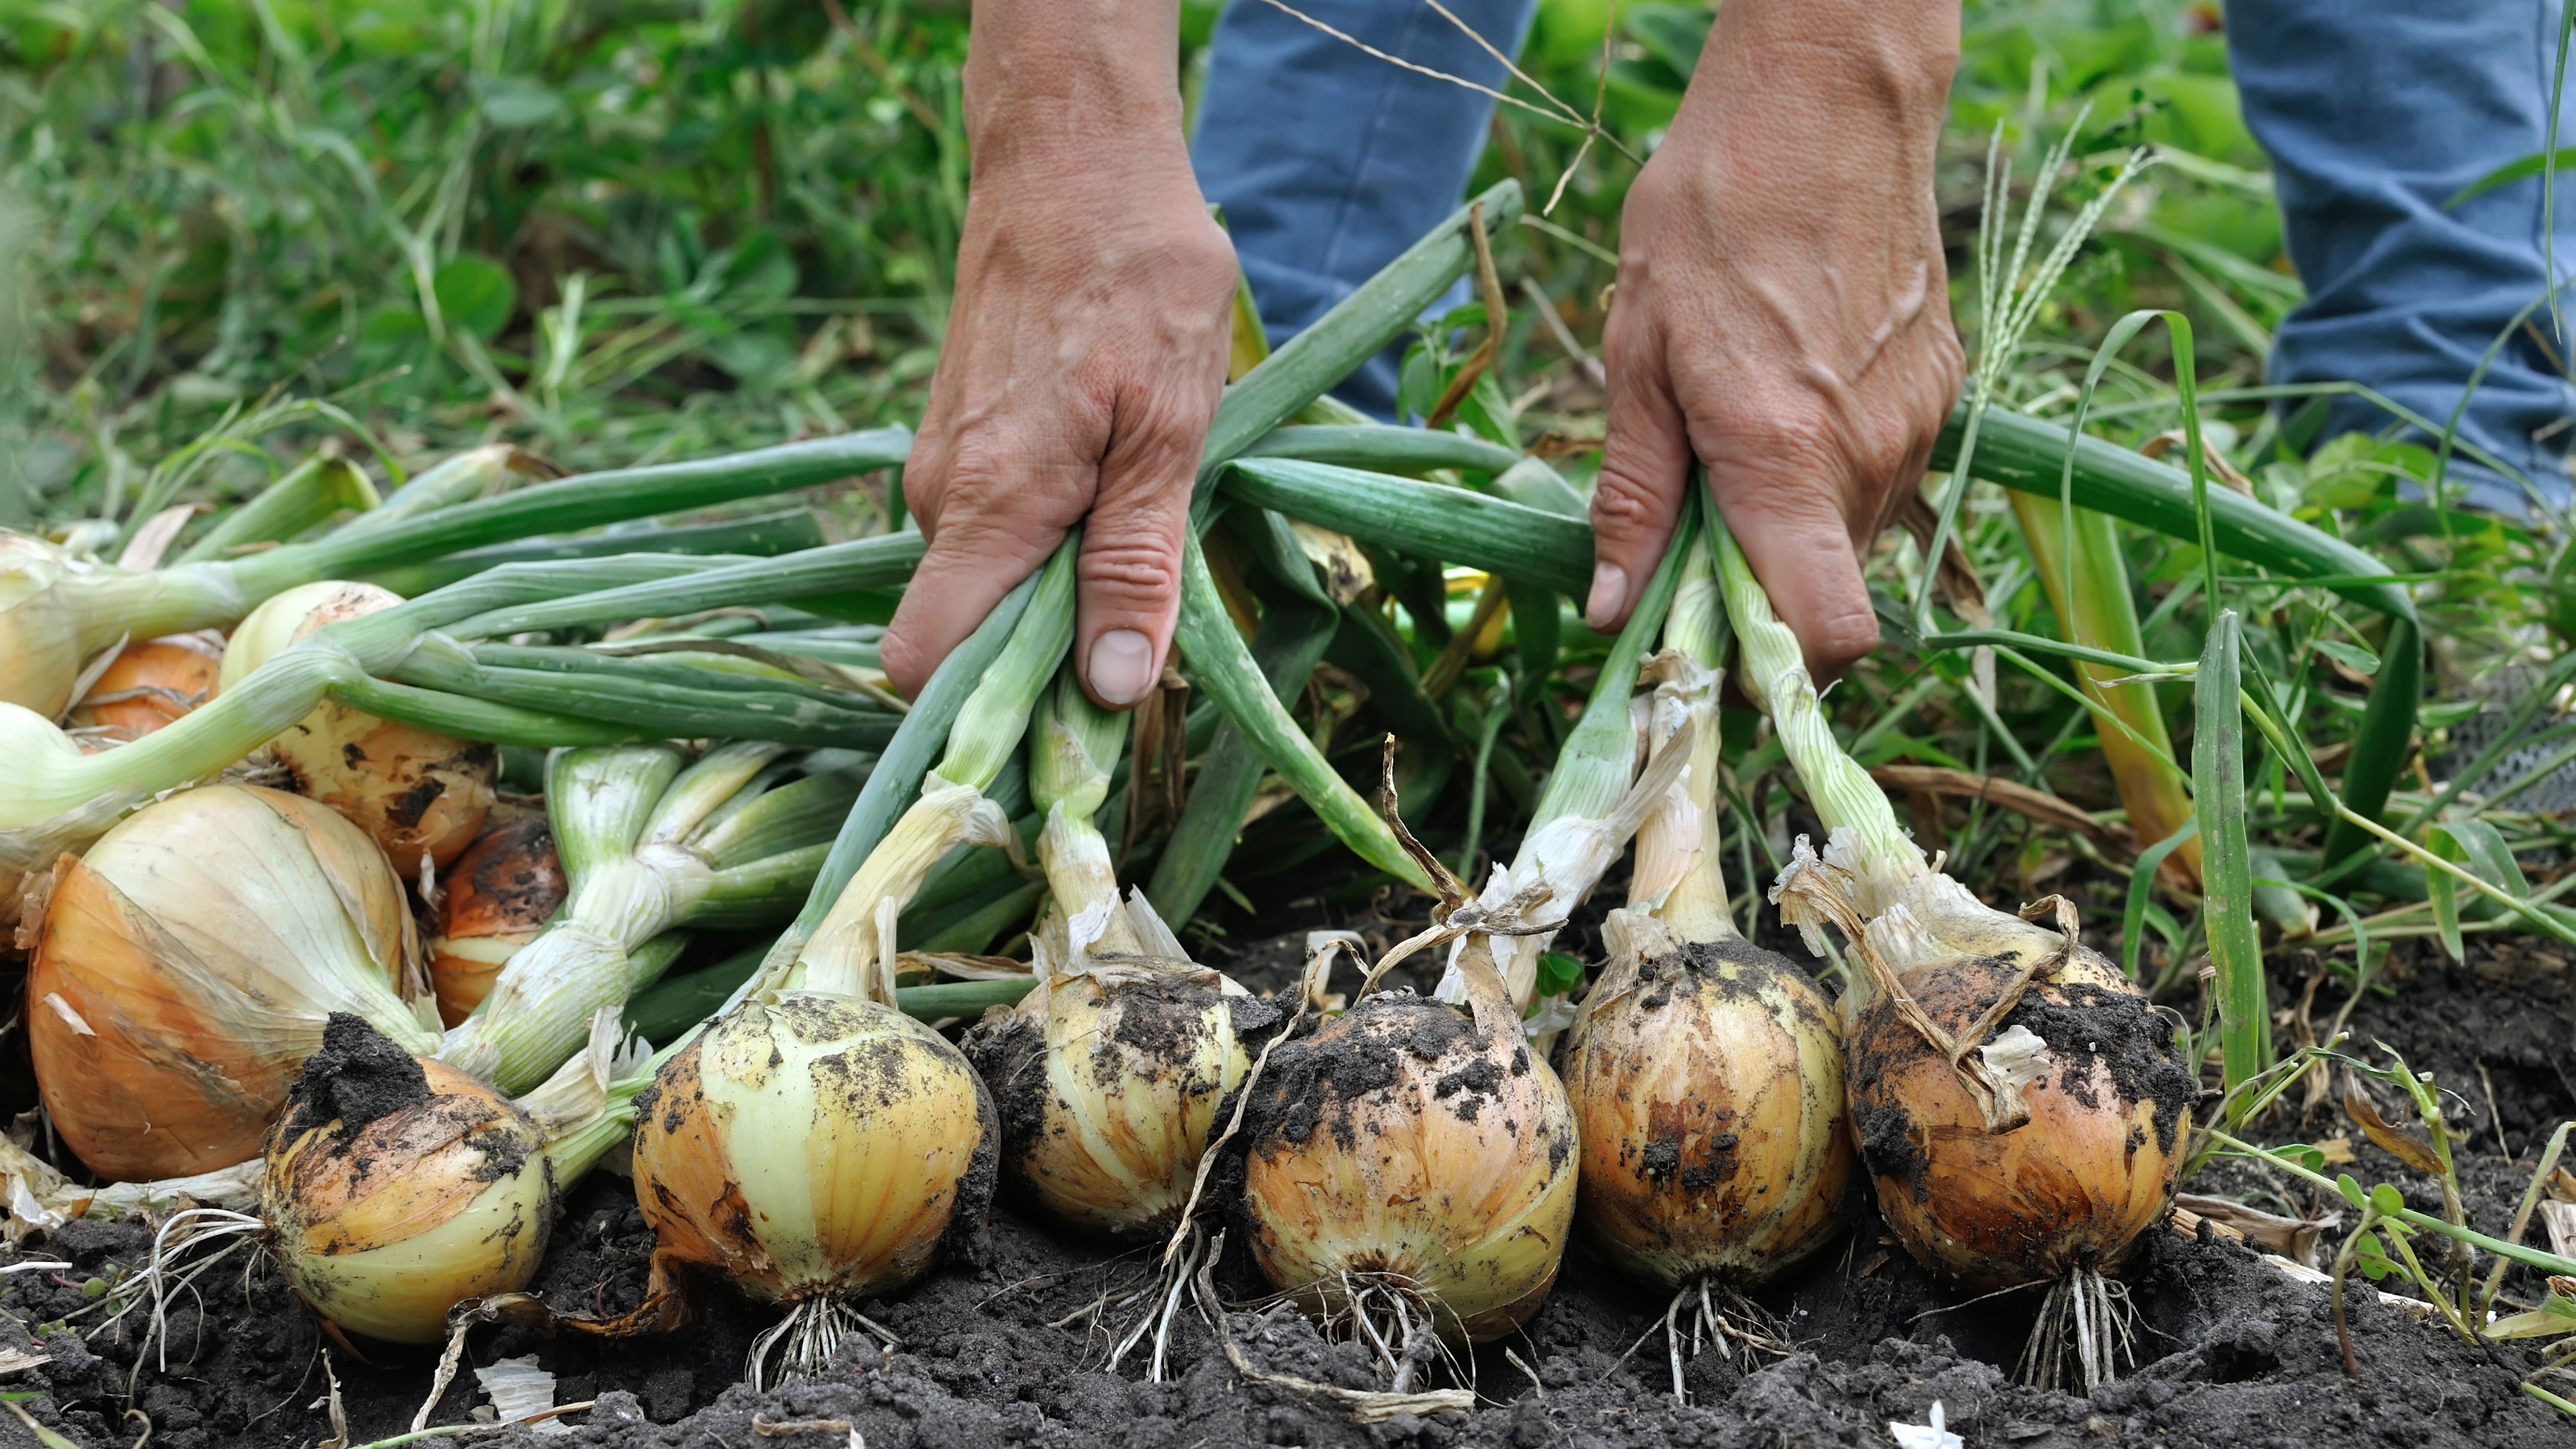 Image of Onions planted near tomatoes to deter pests